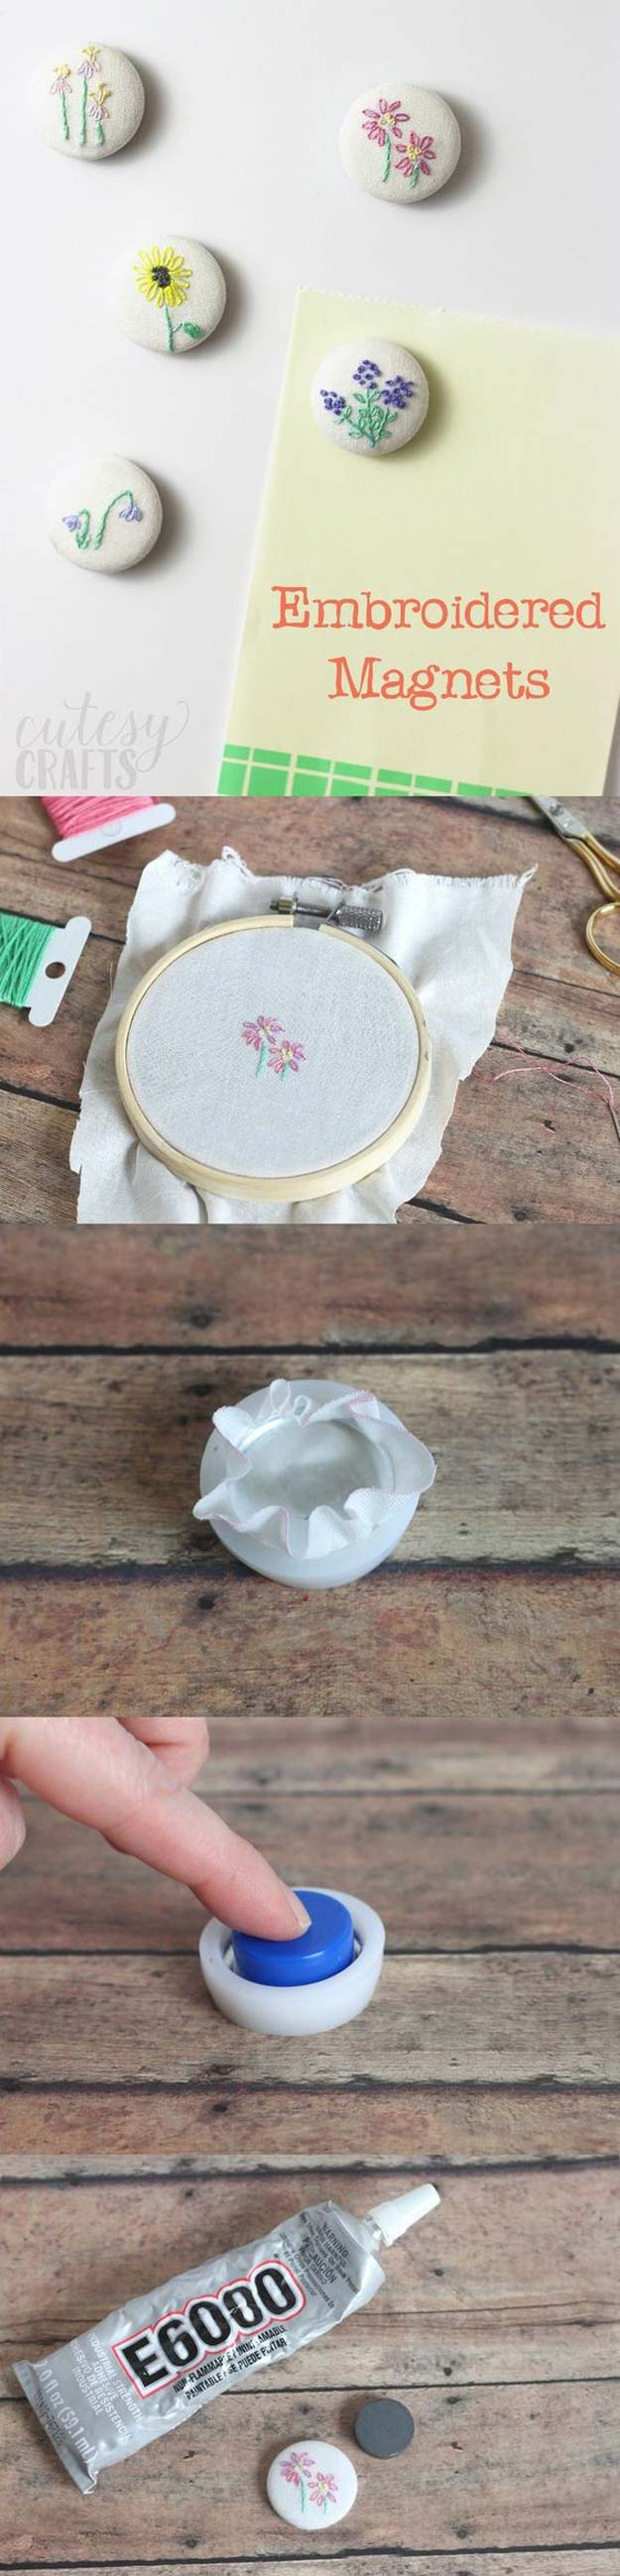 Cool Embroidery Patterns 26 Cool Diy Embroidery Projects And Crafts